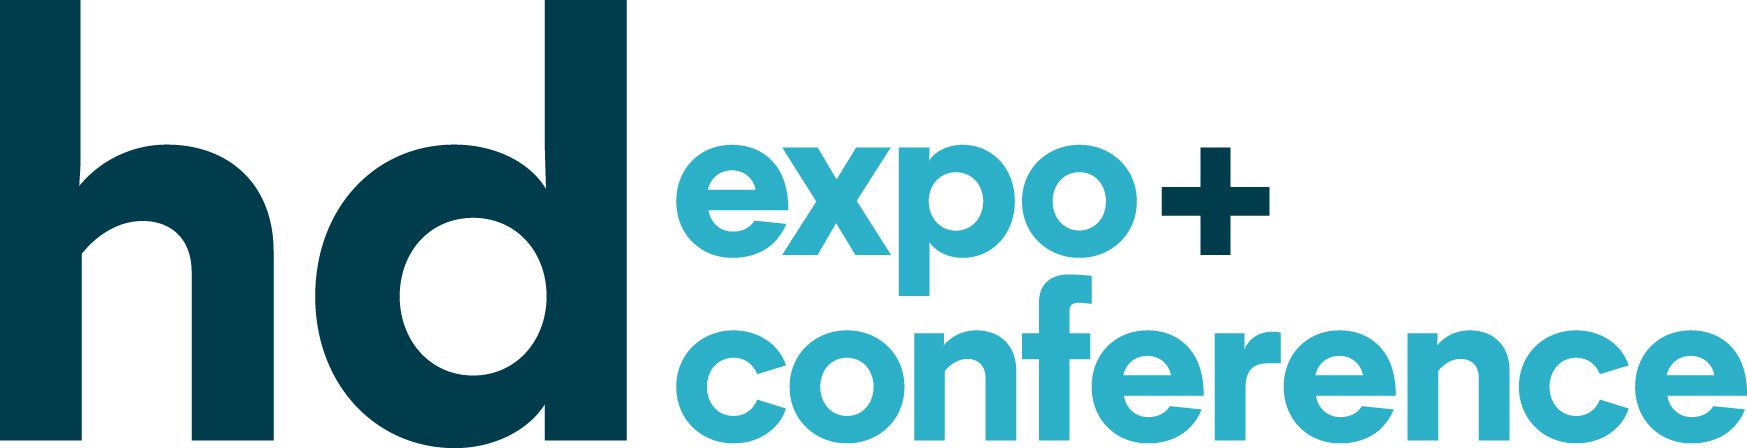 HD Expo and Conference Logo